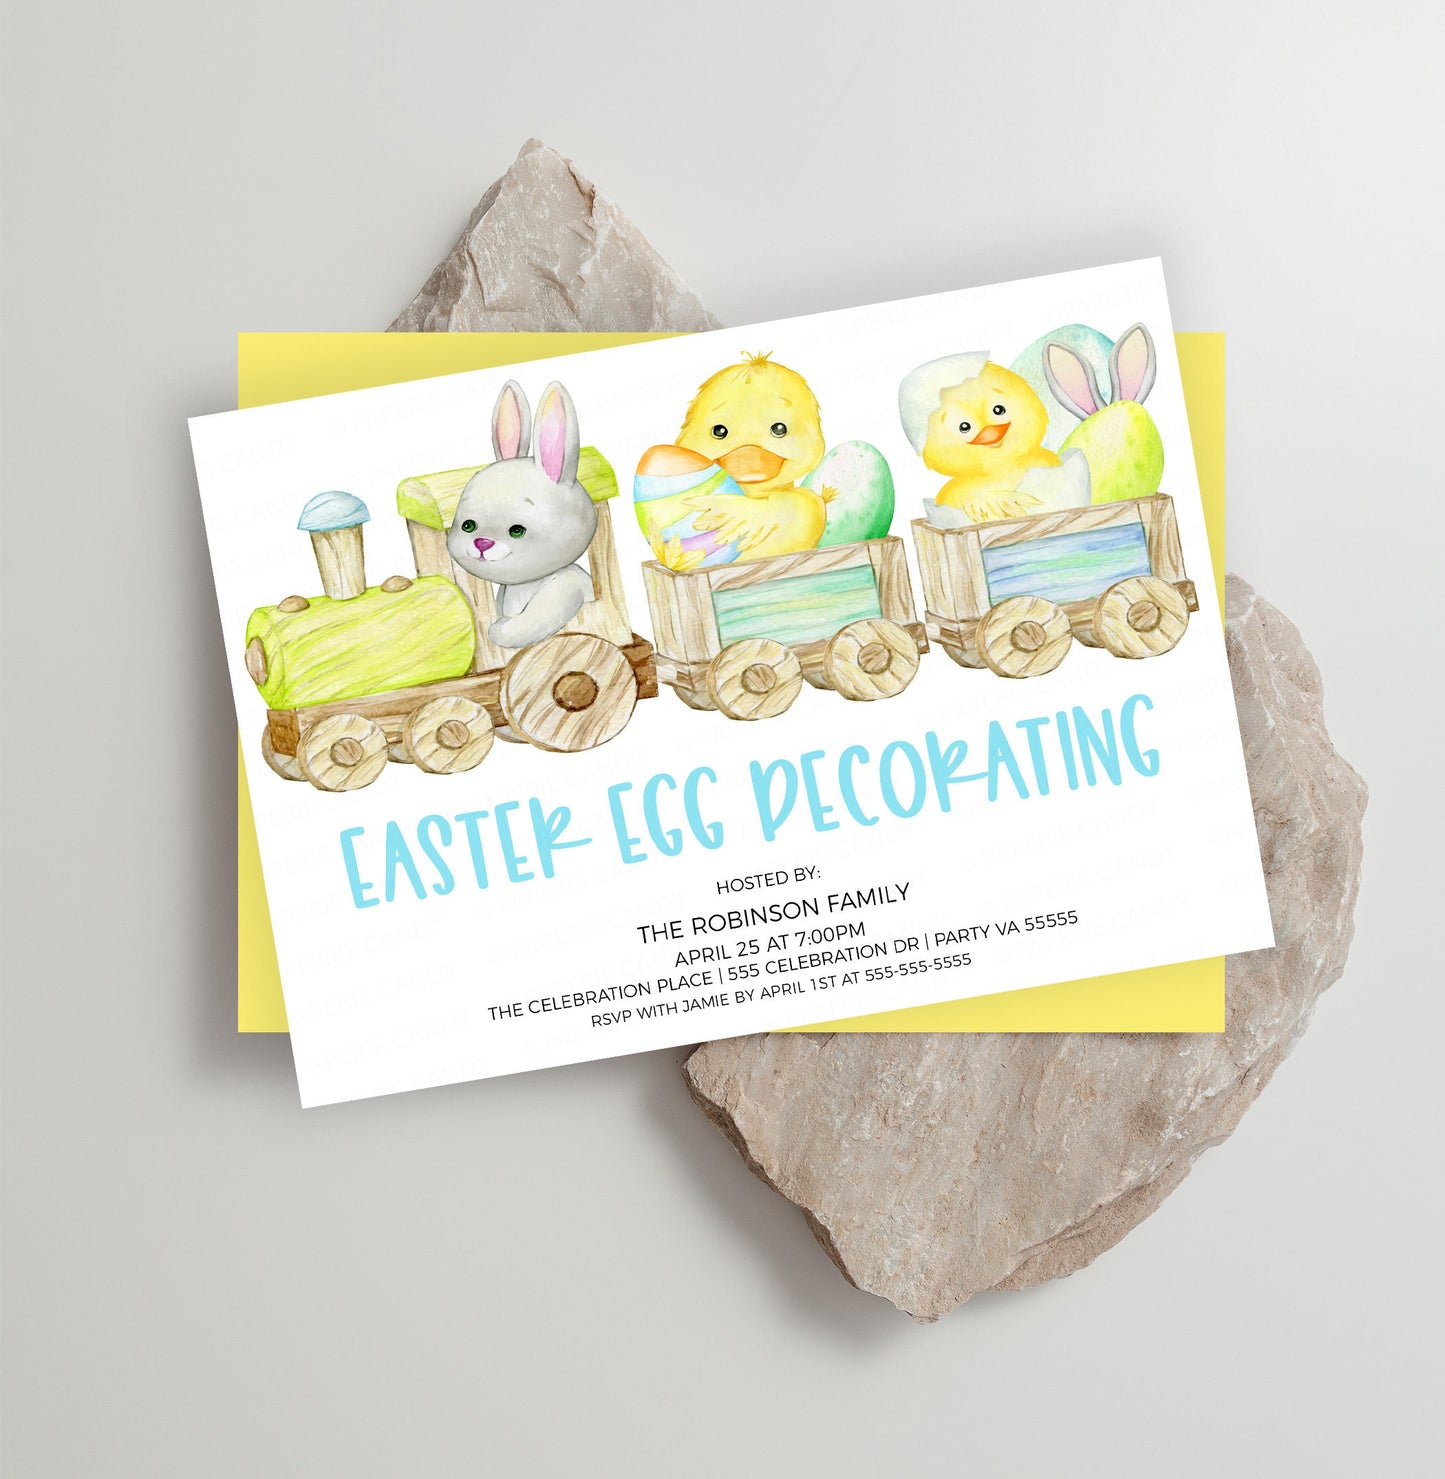 Easter Egg Decorating Invitation, Easter Party Invite, Kids Easter Party, Neighborhood Company Business Egg Decorating, Editable Printable